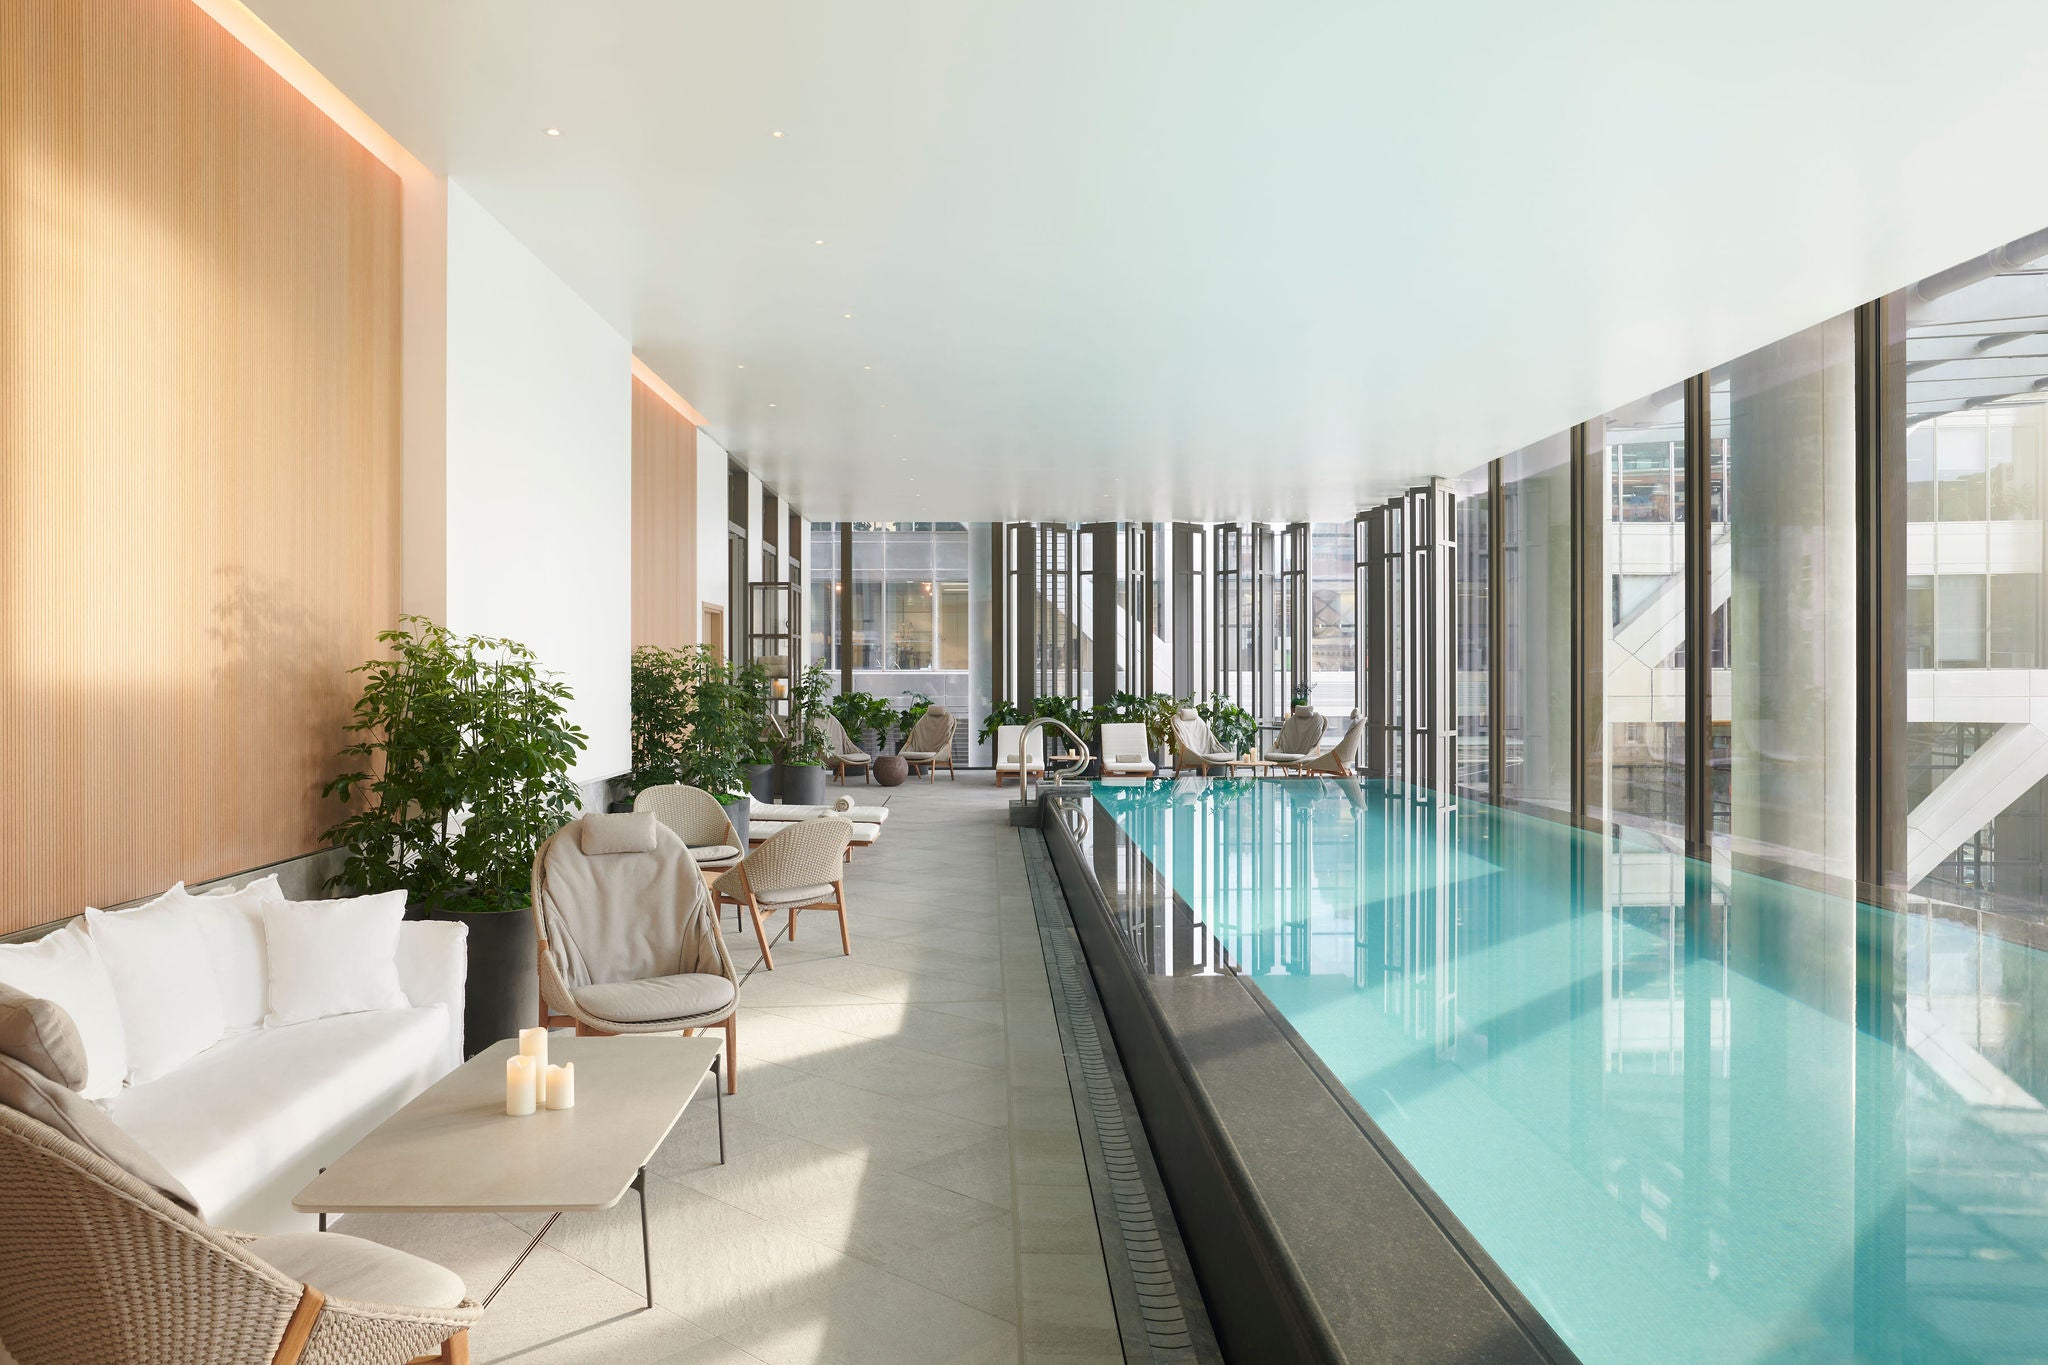 The 18.5m infinity pool at the Pan Pacific London